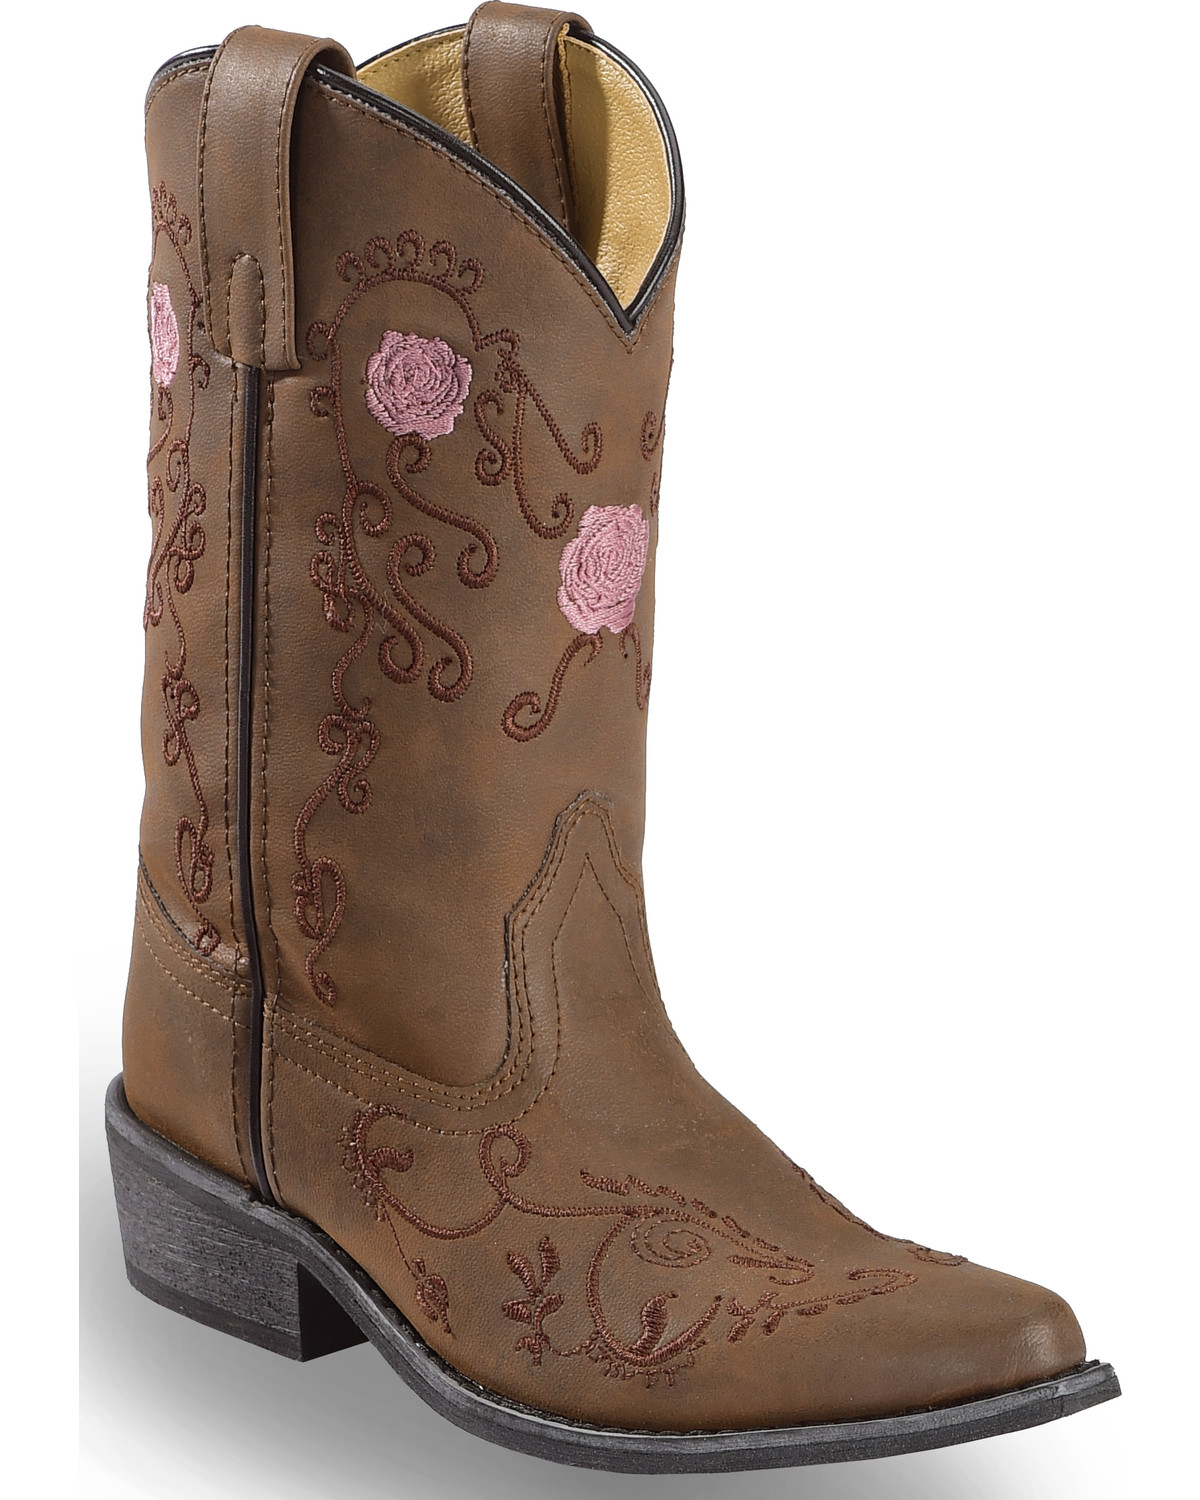 floral work boots